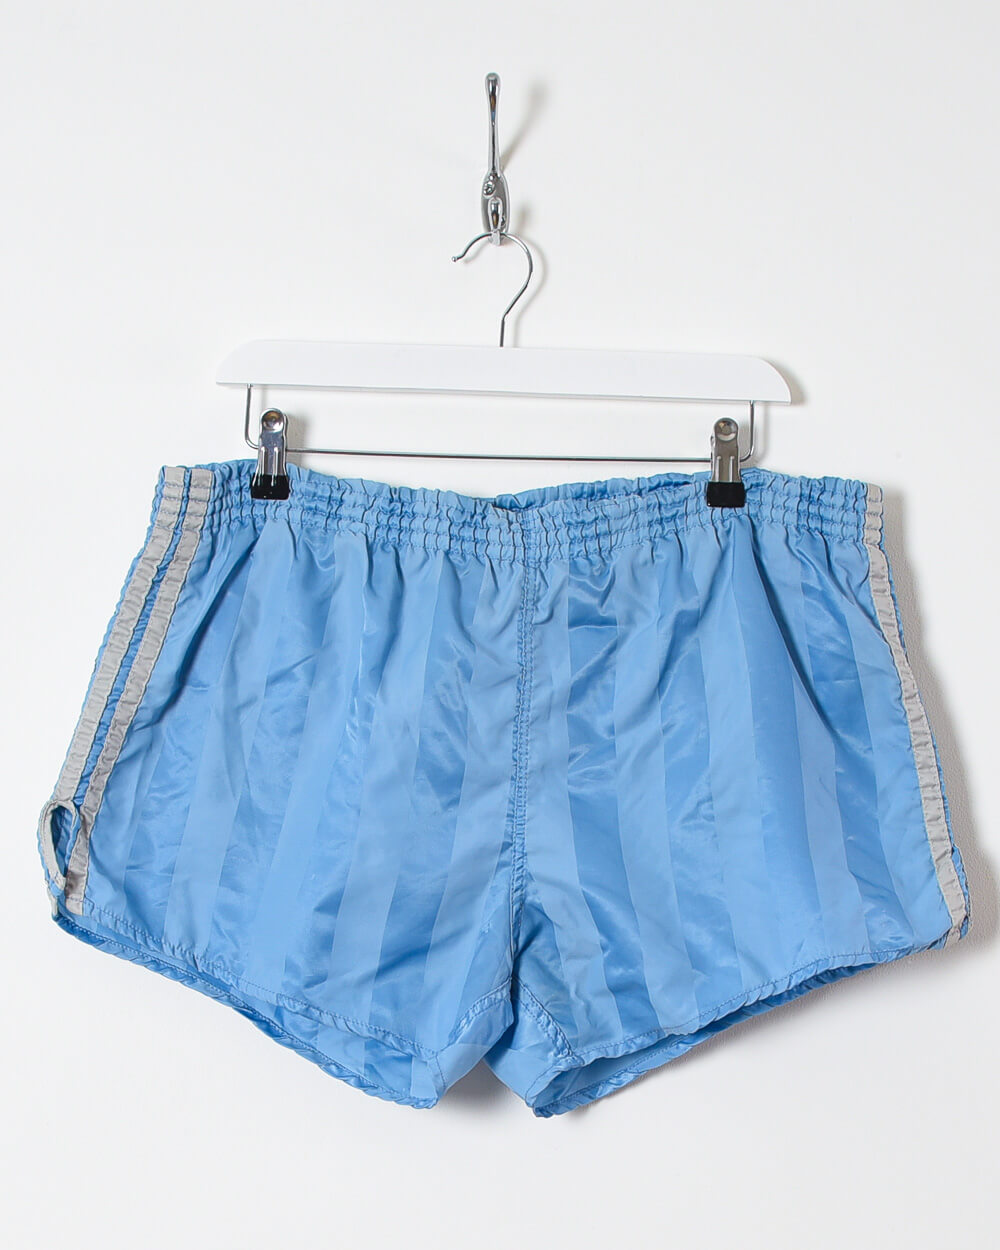 Adidas Shorts - W36 - Domno Vintage 90s, 80s, 00s Retro and Vintage Clothing 